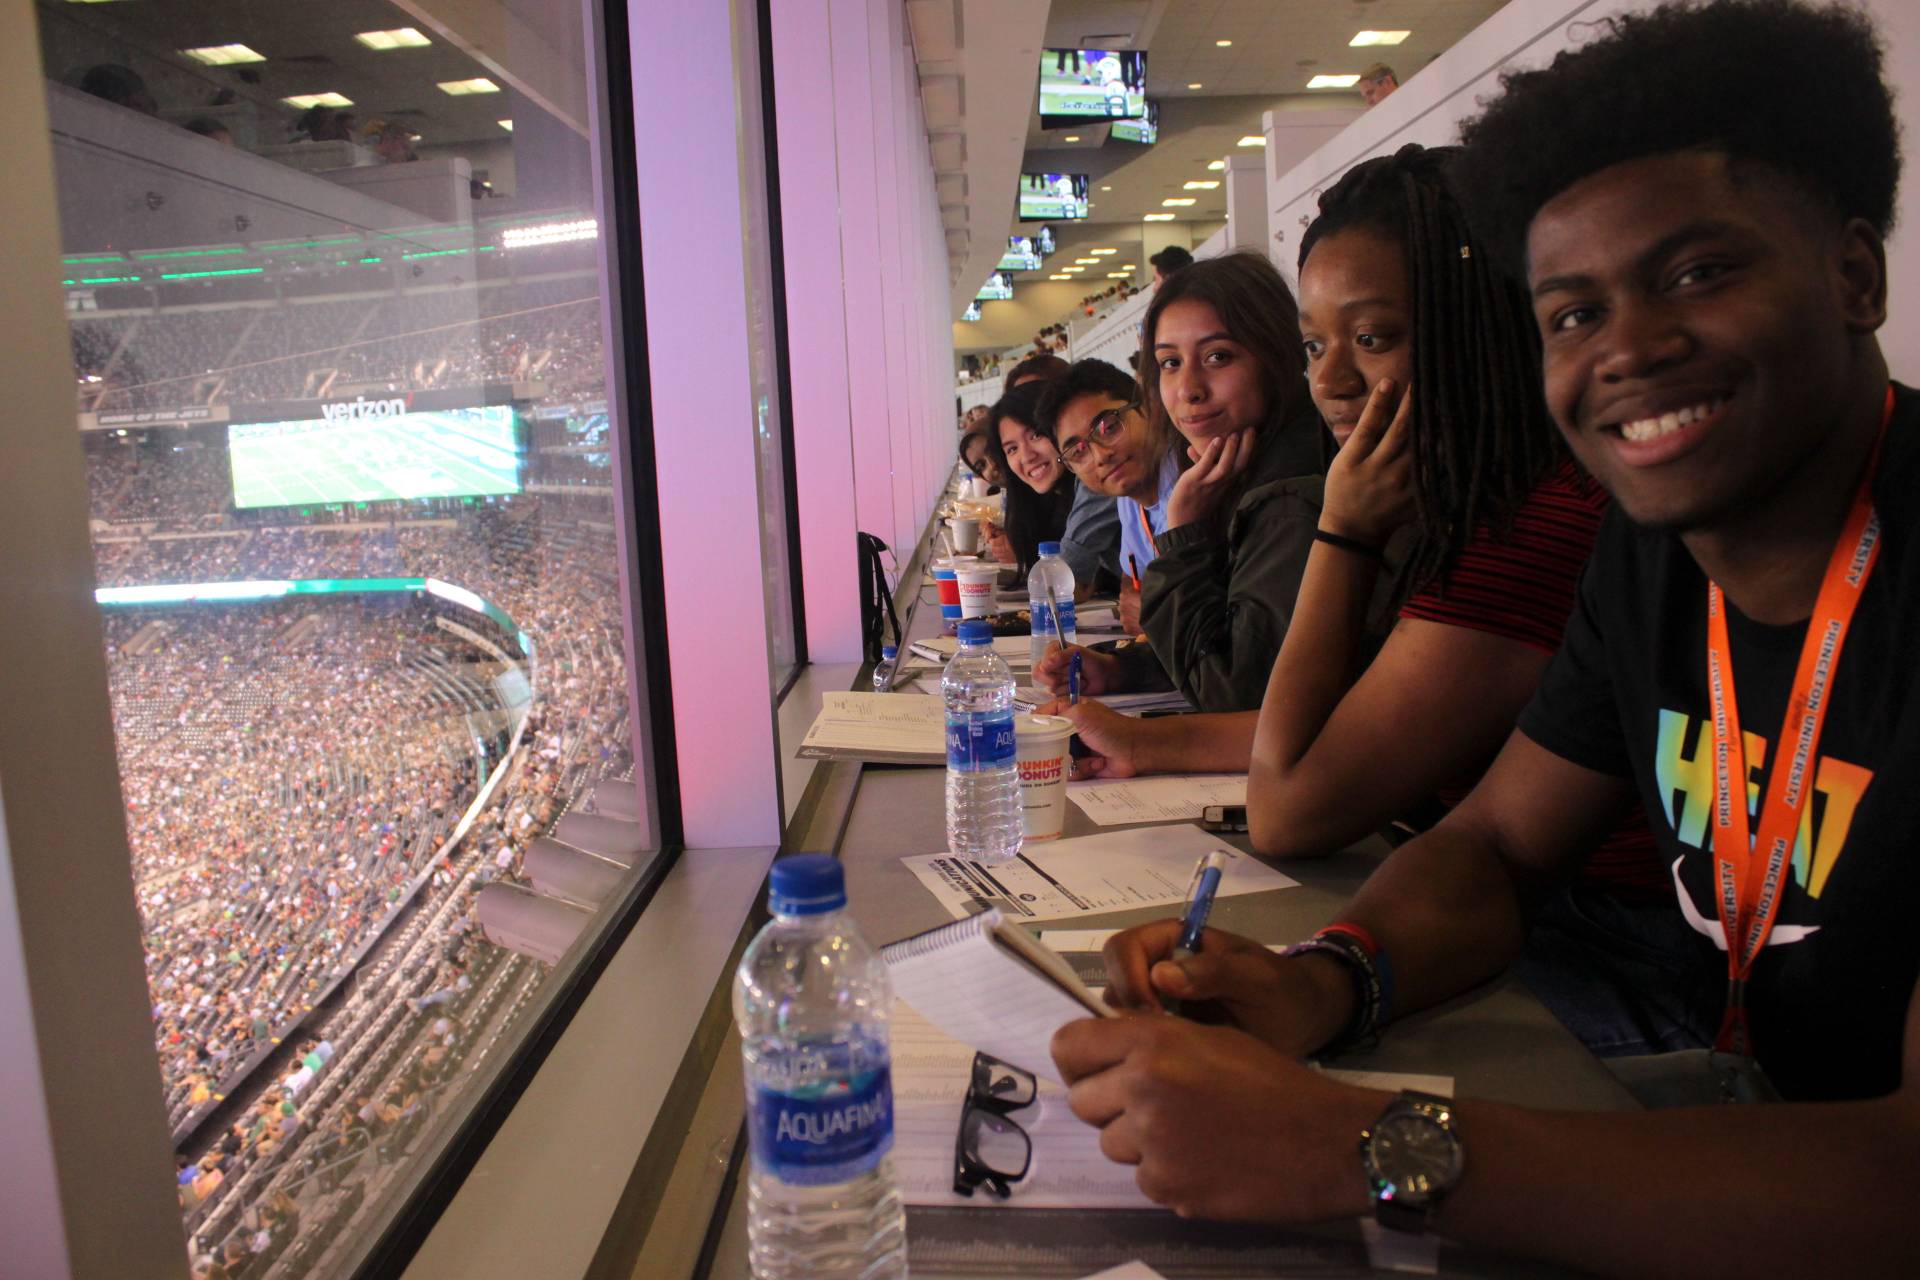 Summer Journalism Program students in press box during Jets football game